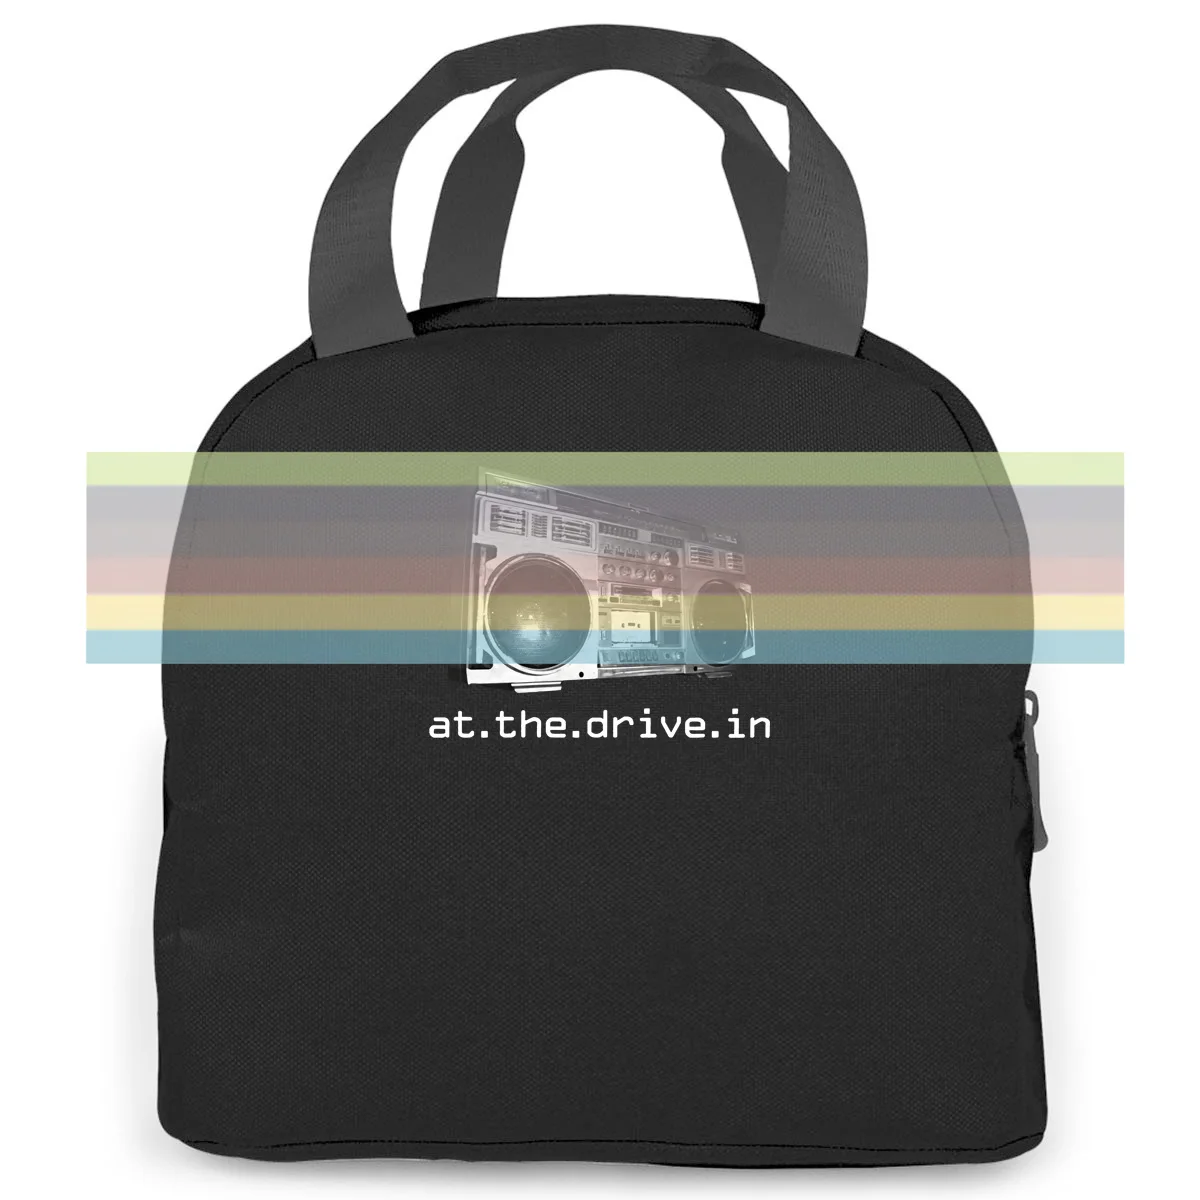 

At The Drive In 'Boombox' - NEW & OFFICIAL! Brand women men Portable insulated lunch bag adult